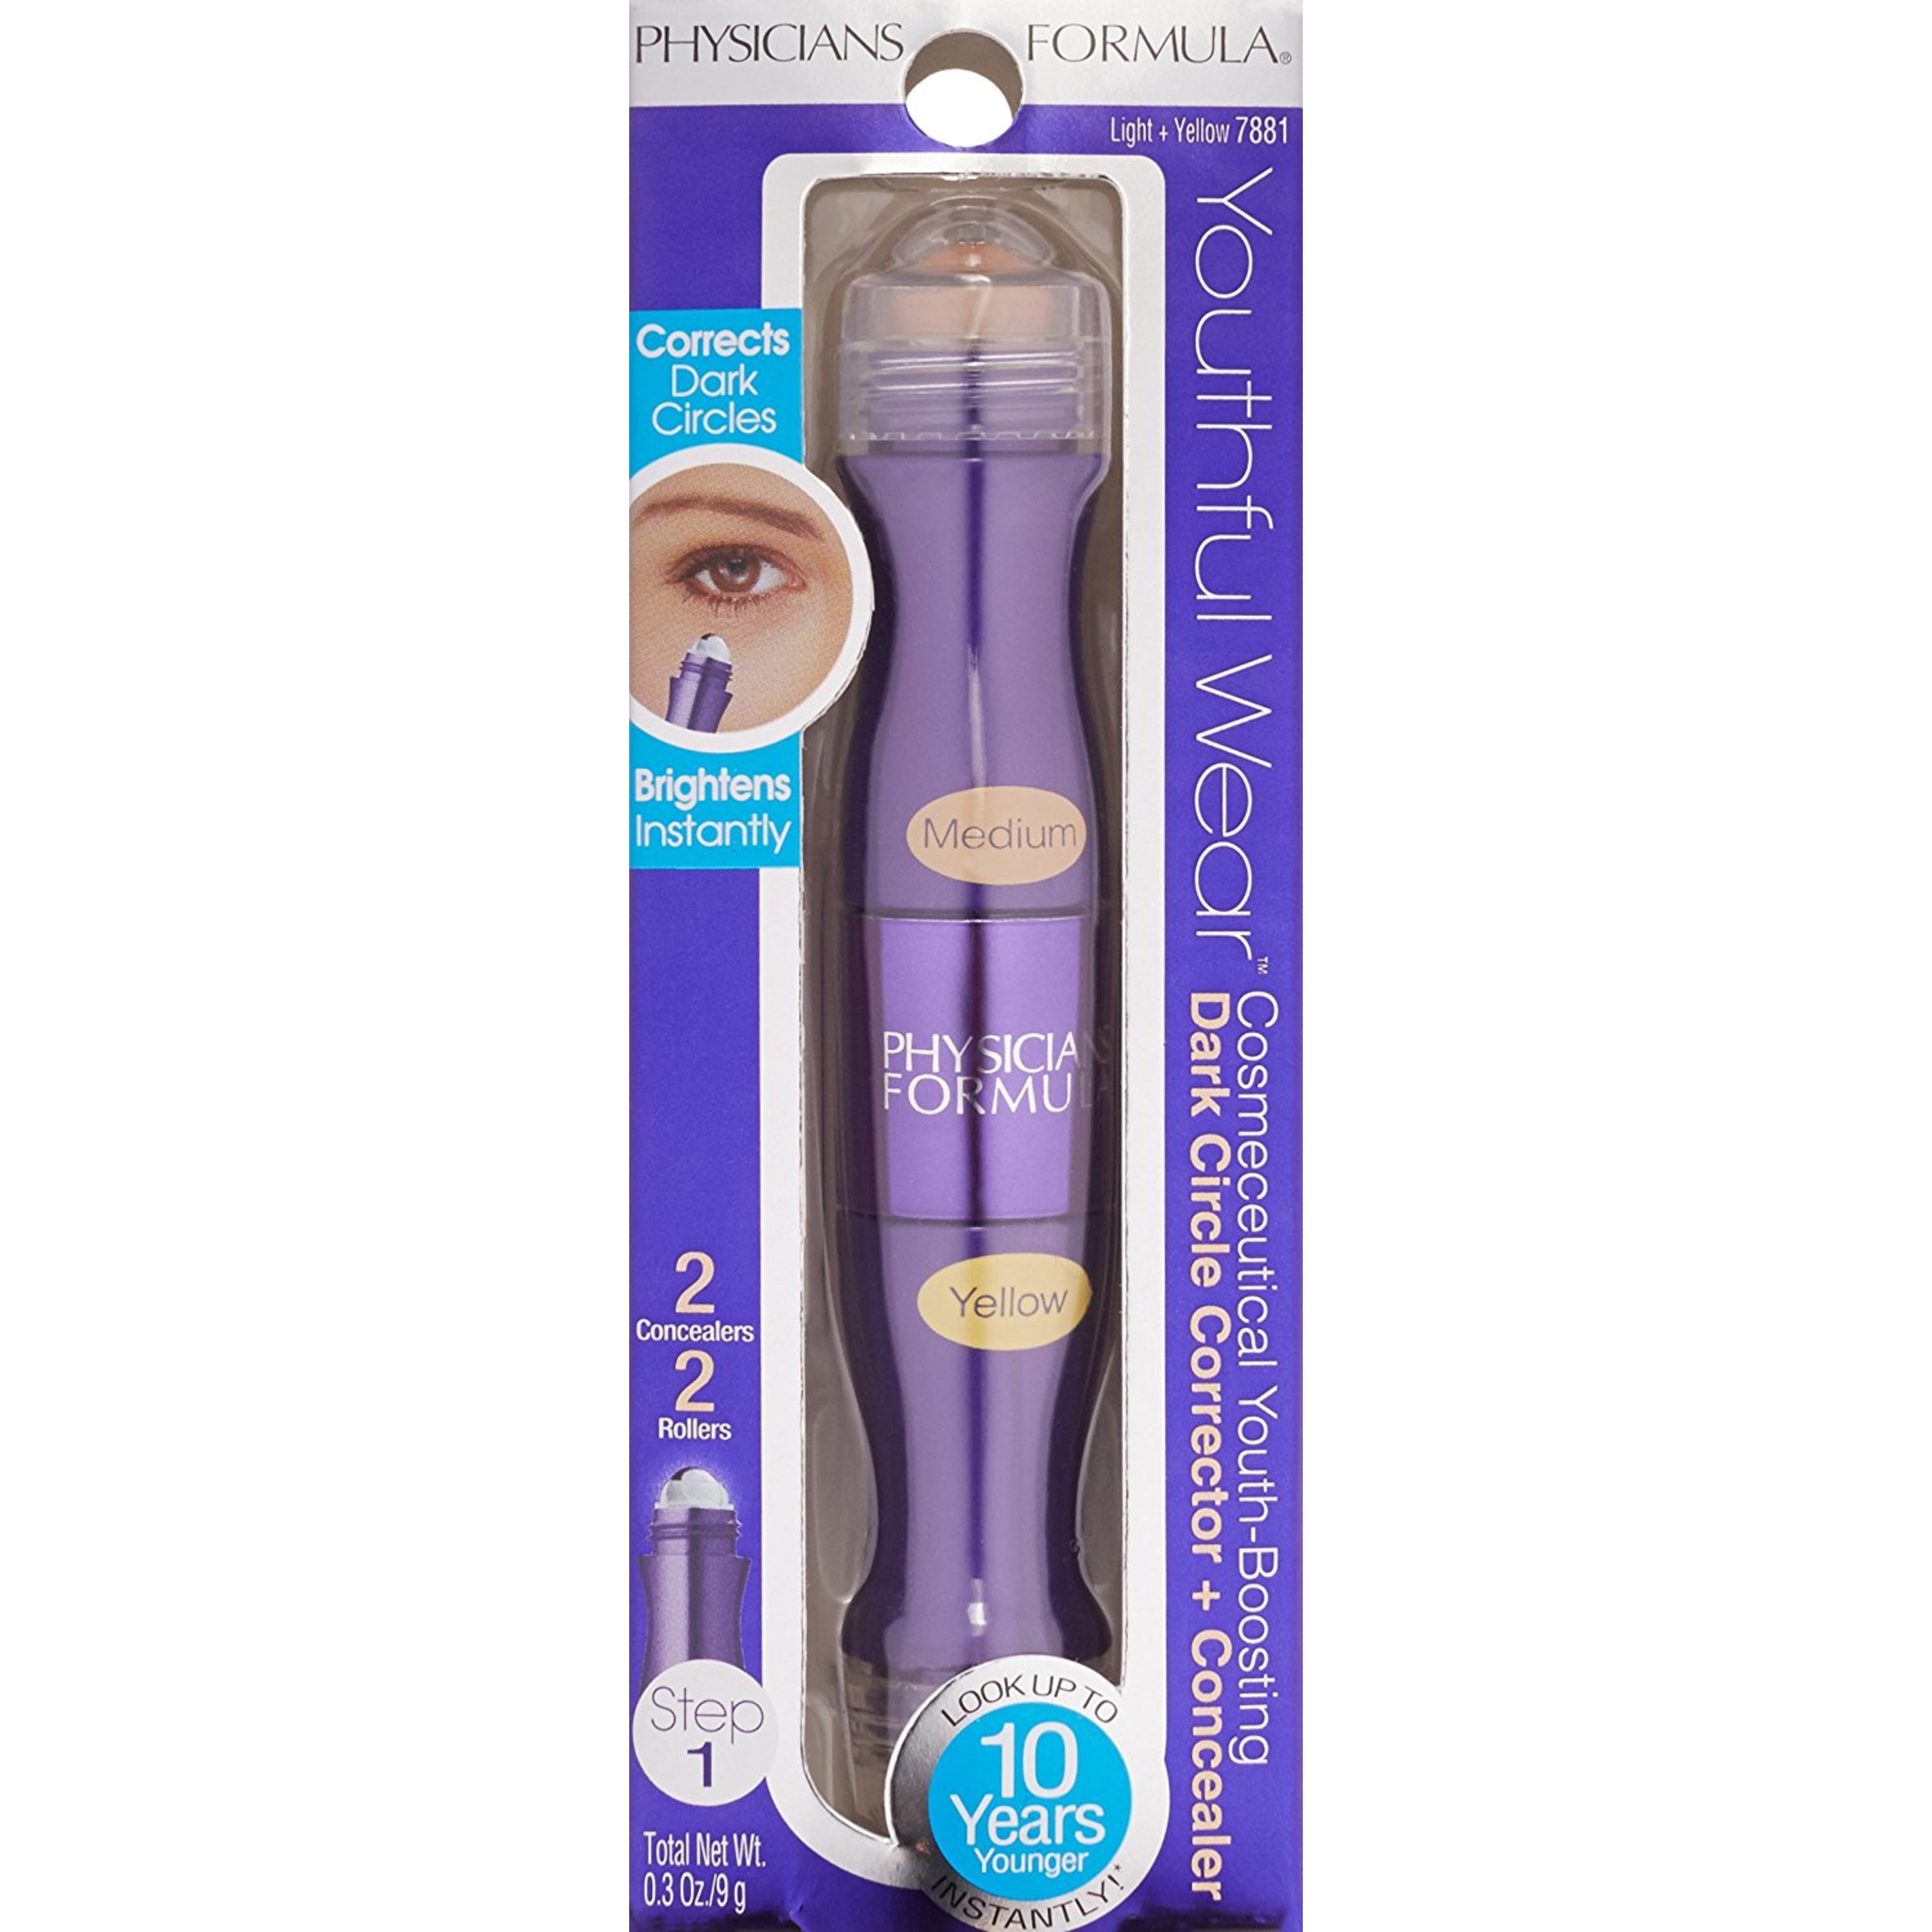 Physicians Formula Youthful Wear™ Cosmeceutical Youth-Boosting 2-in-1 Dark Circle Corrector + Concealer, Light/Yellow - image 2 of 3